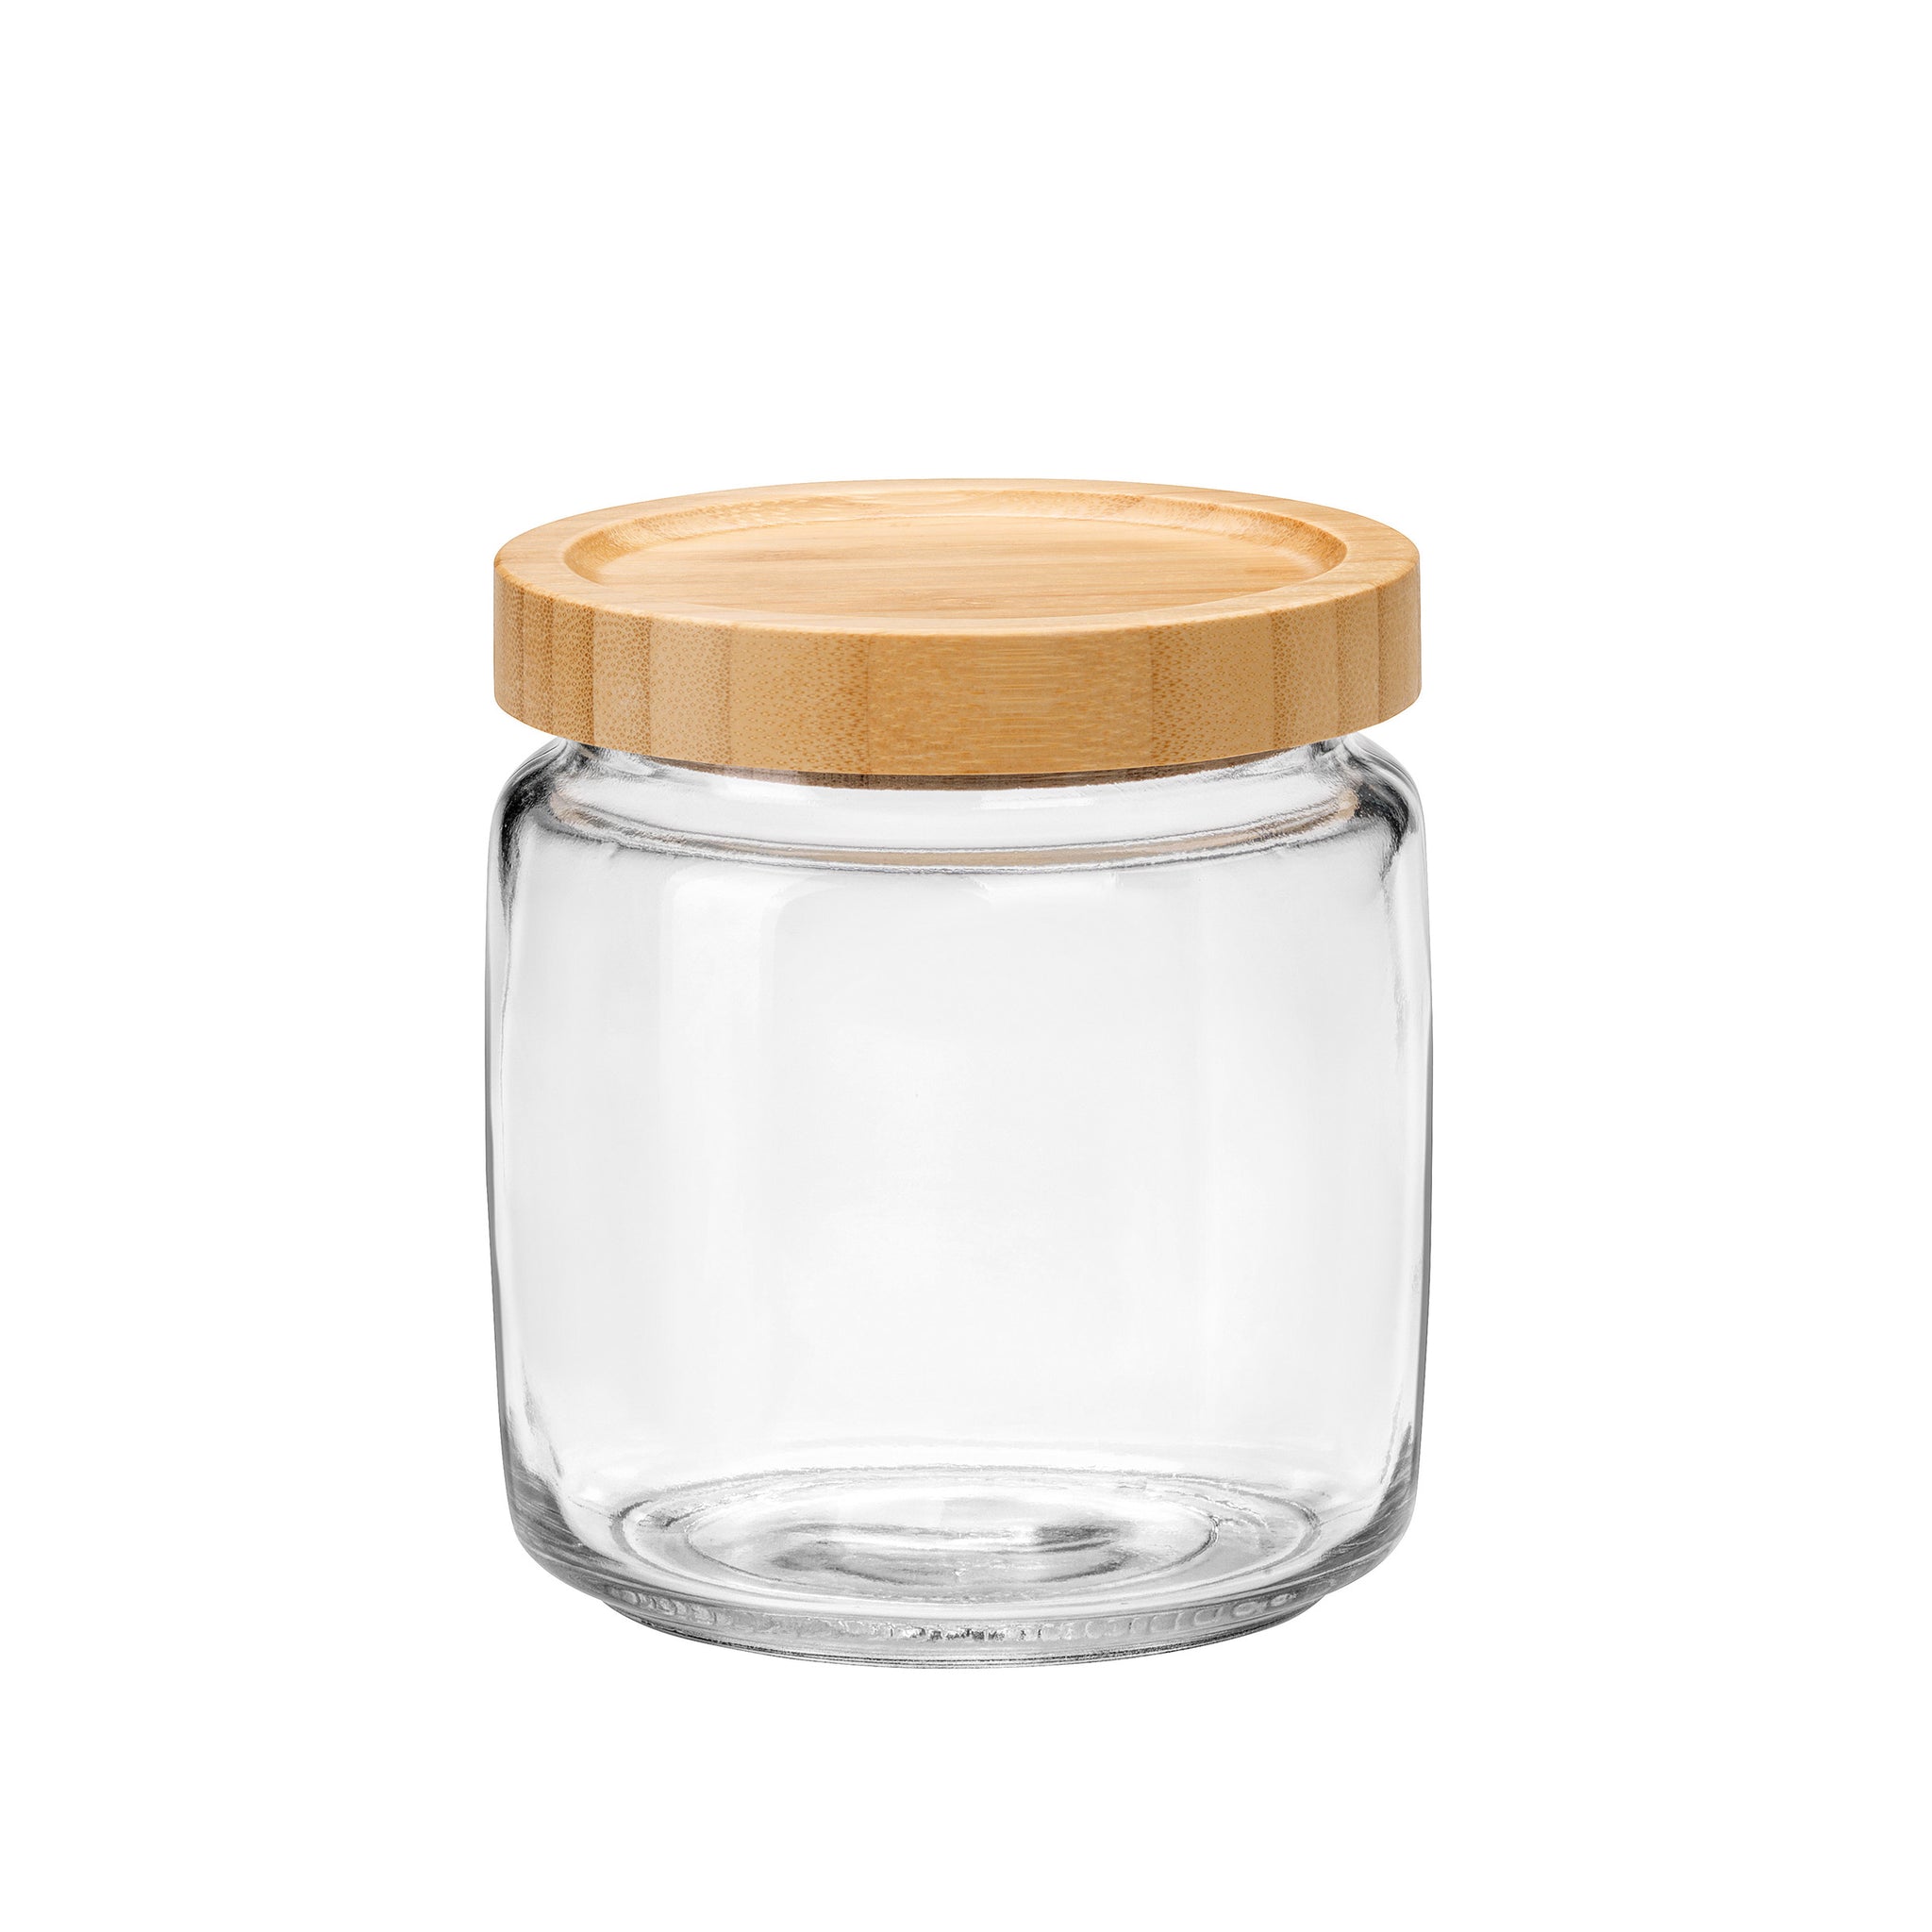 Frigoverre 25.25 oz. Bamboo Round Food Storage Container (Set of 6)